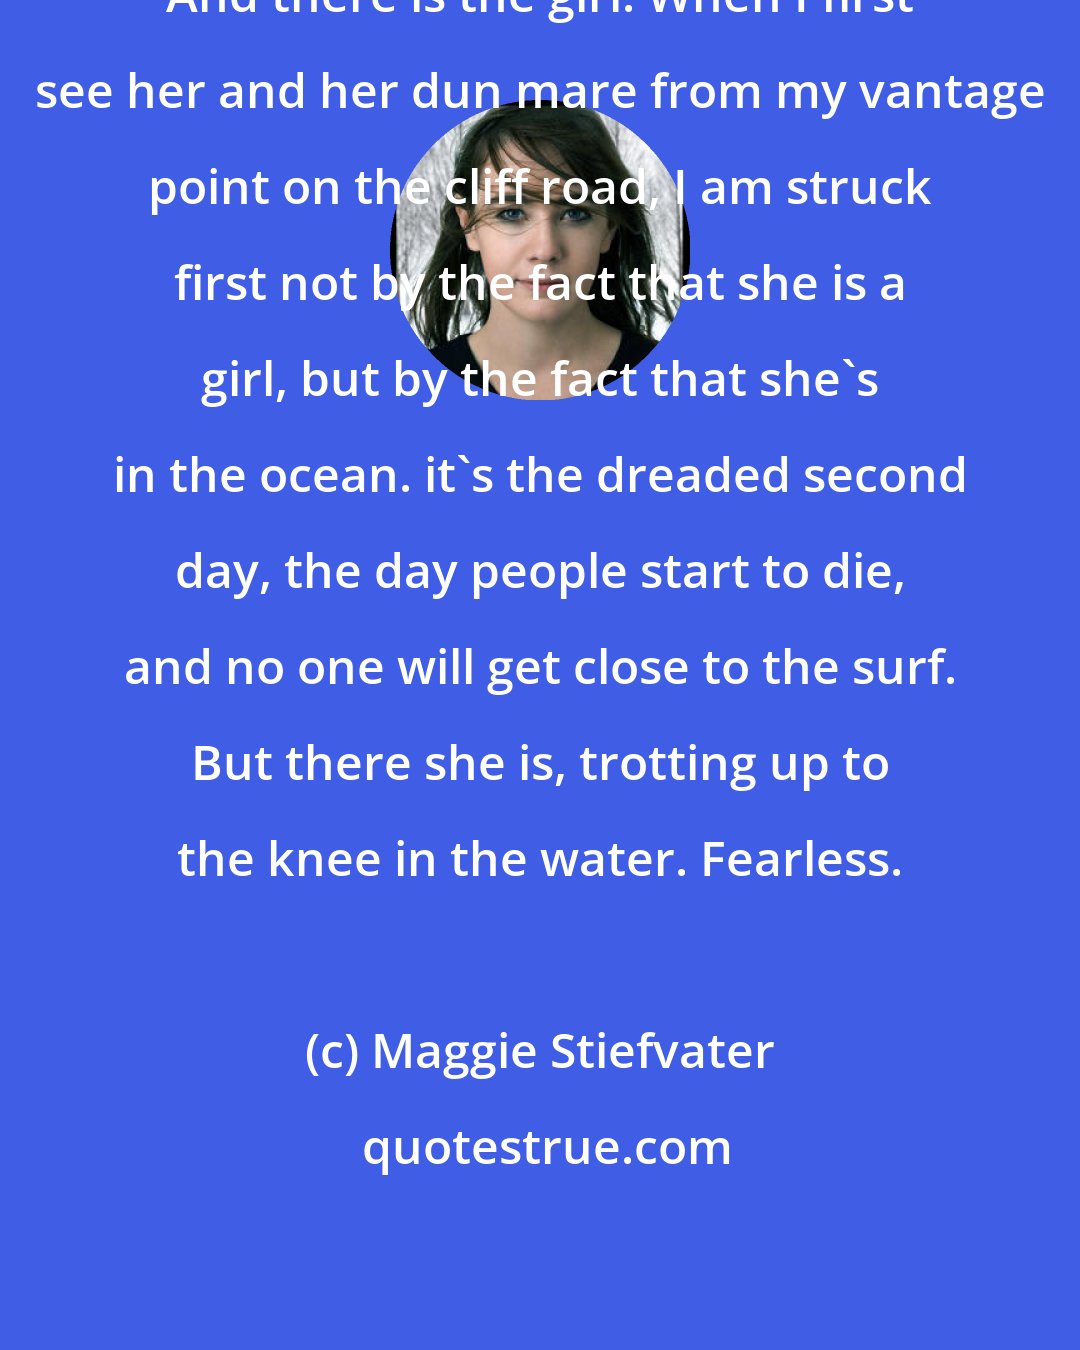 Maggie Stiefvater: And there is the girl. When I first see her and her dun mare from my vantage point on the cliff road, I am struck first not by the fact that she is a girl, but by the fact that she's in the ocean. it's the dreaded second day, the day people start to die, and no one will get close to the surf. But there she is, trotting up to the knee in the water. Fearless.